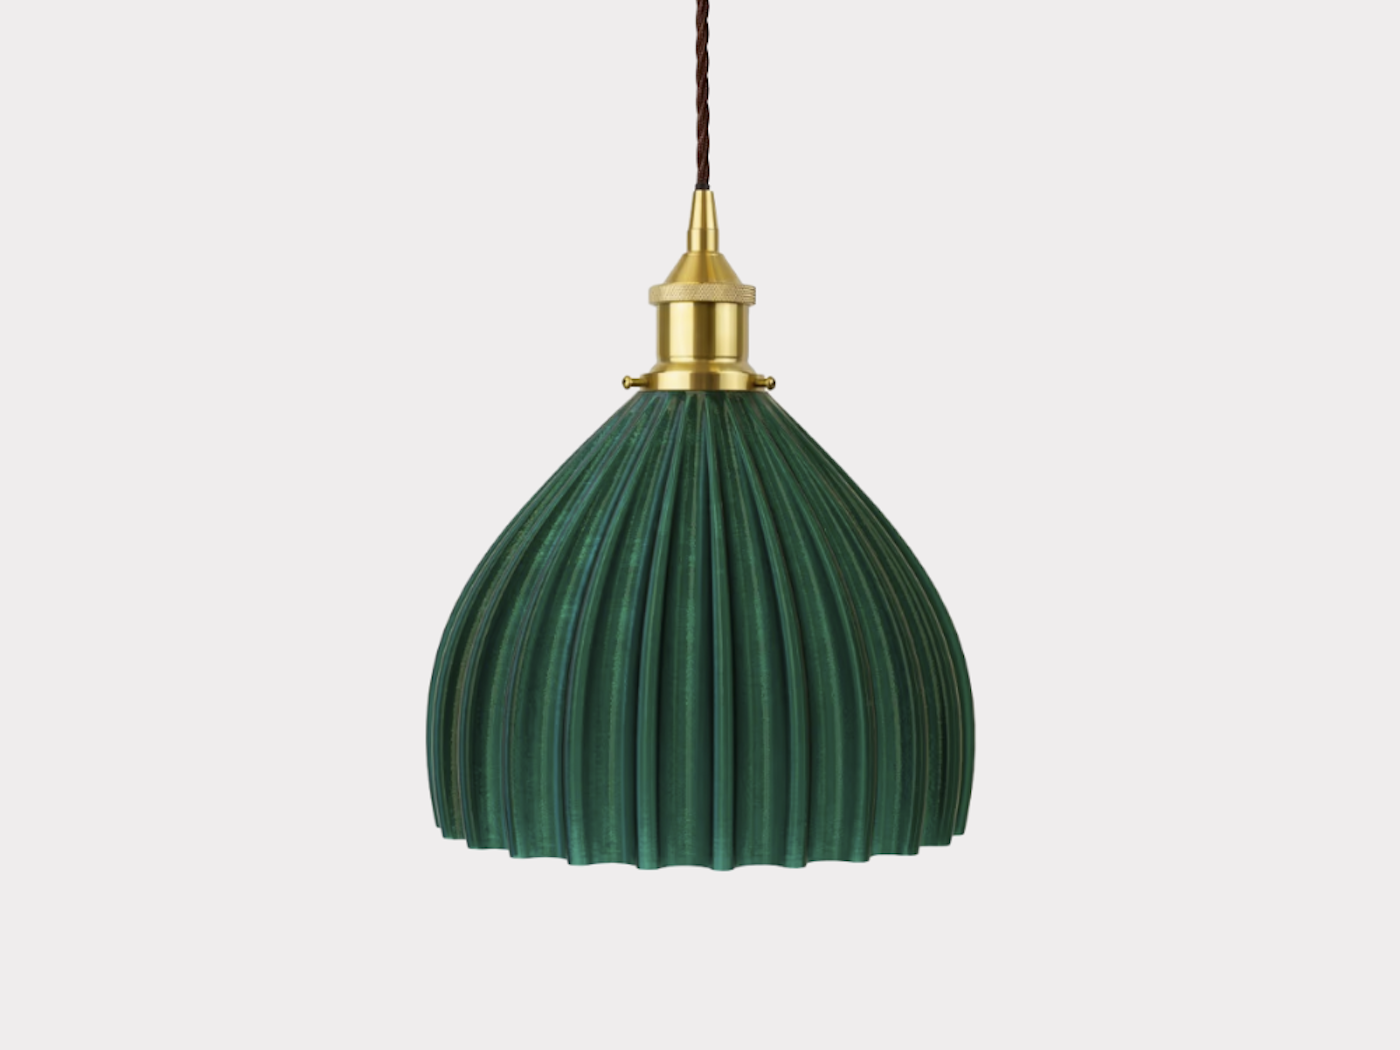 This shell-shaped pendant light is available for £295.  